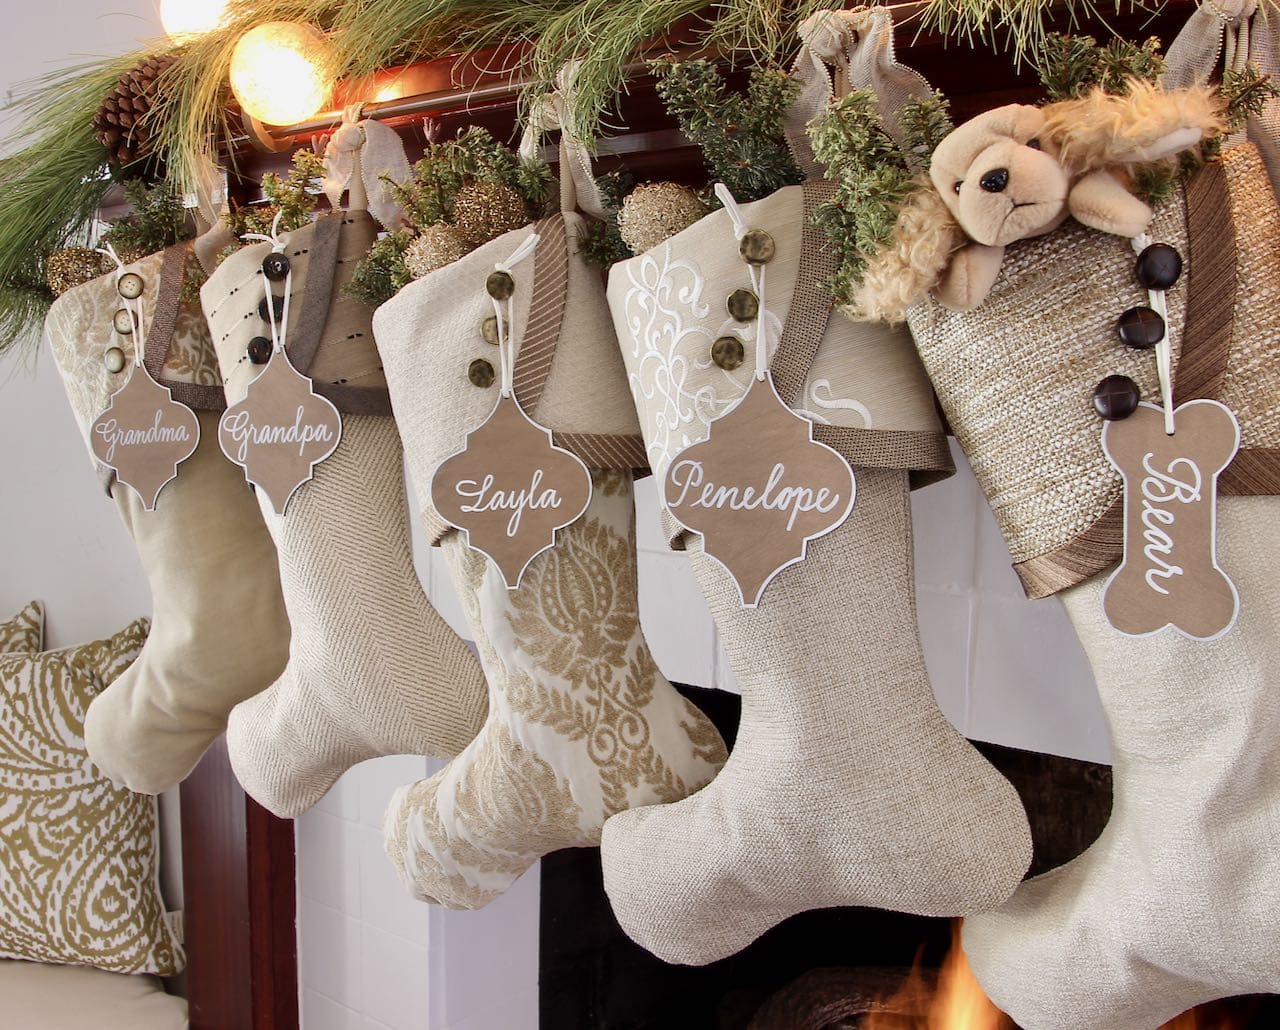 Arabesque shaped name tags are hanging on the top buttons of the stocking cuffs on 5 Warm Neutral Christmas Stockings hanging beneath an overhang of long needle pine branches